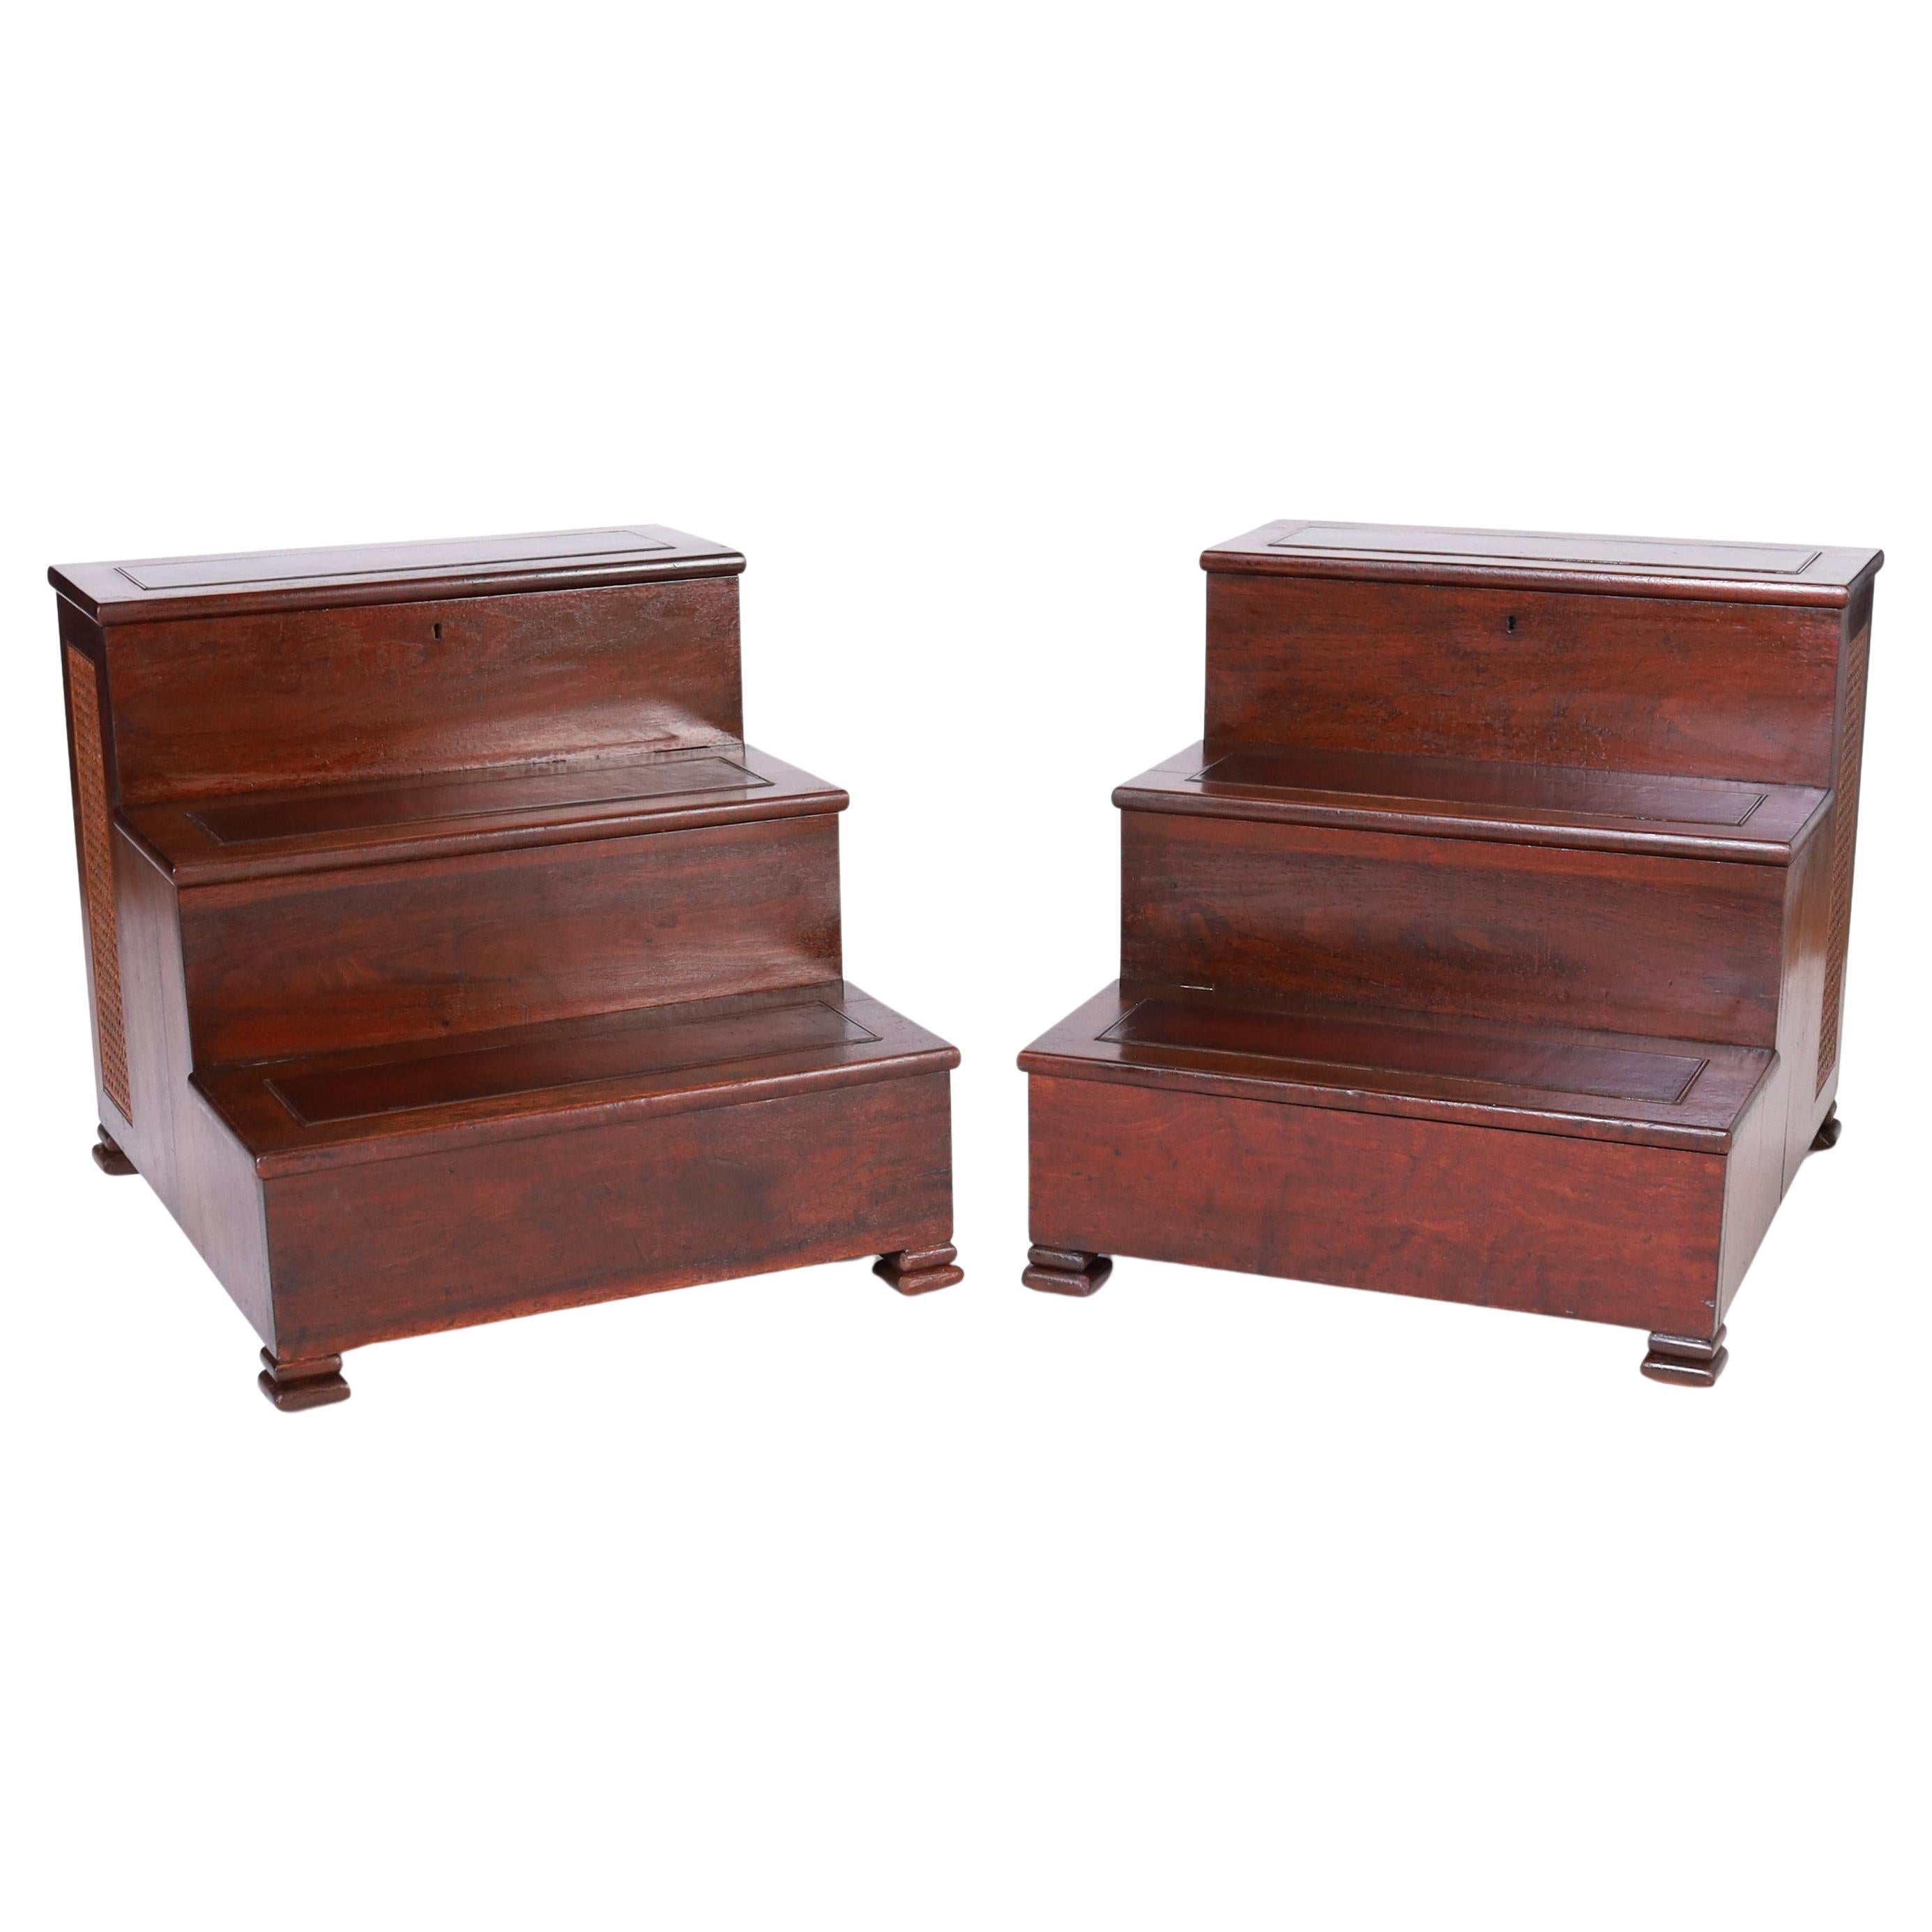 Pair of English Library Steps or Stands with Cane Panels For Sale